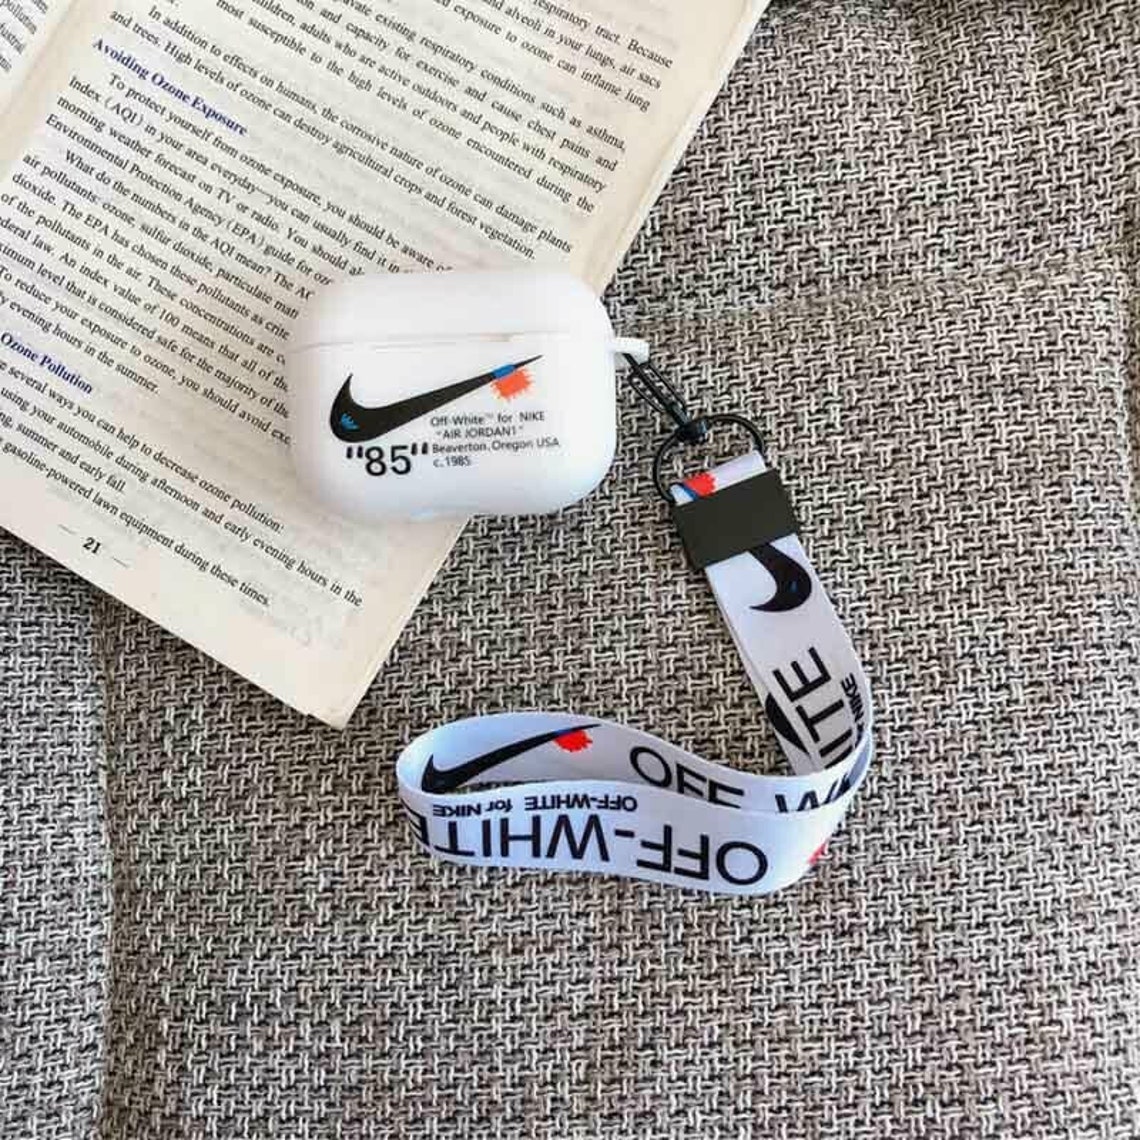 OFF WHITE x NIKE Airpods Case Airpods 1 & 2 Airpods Pro | Etsy